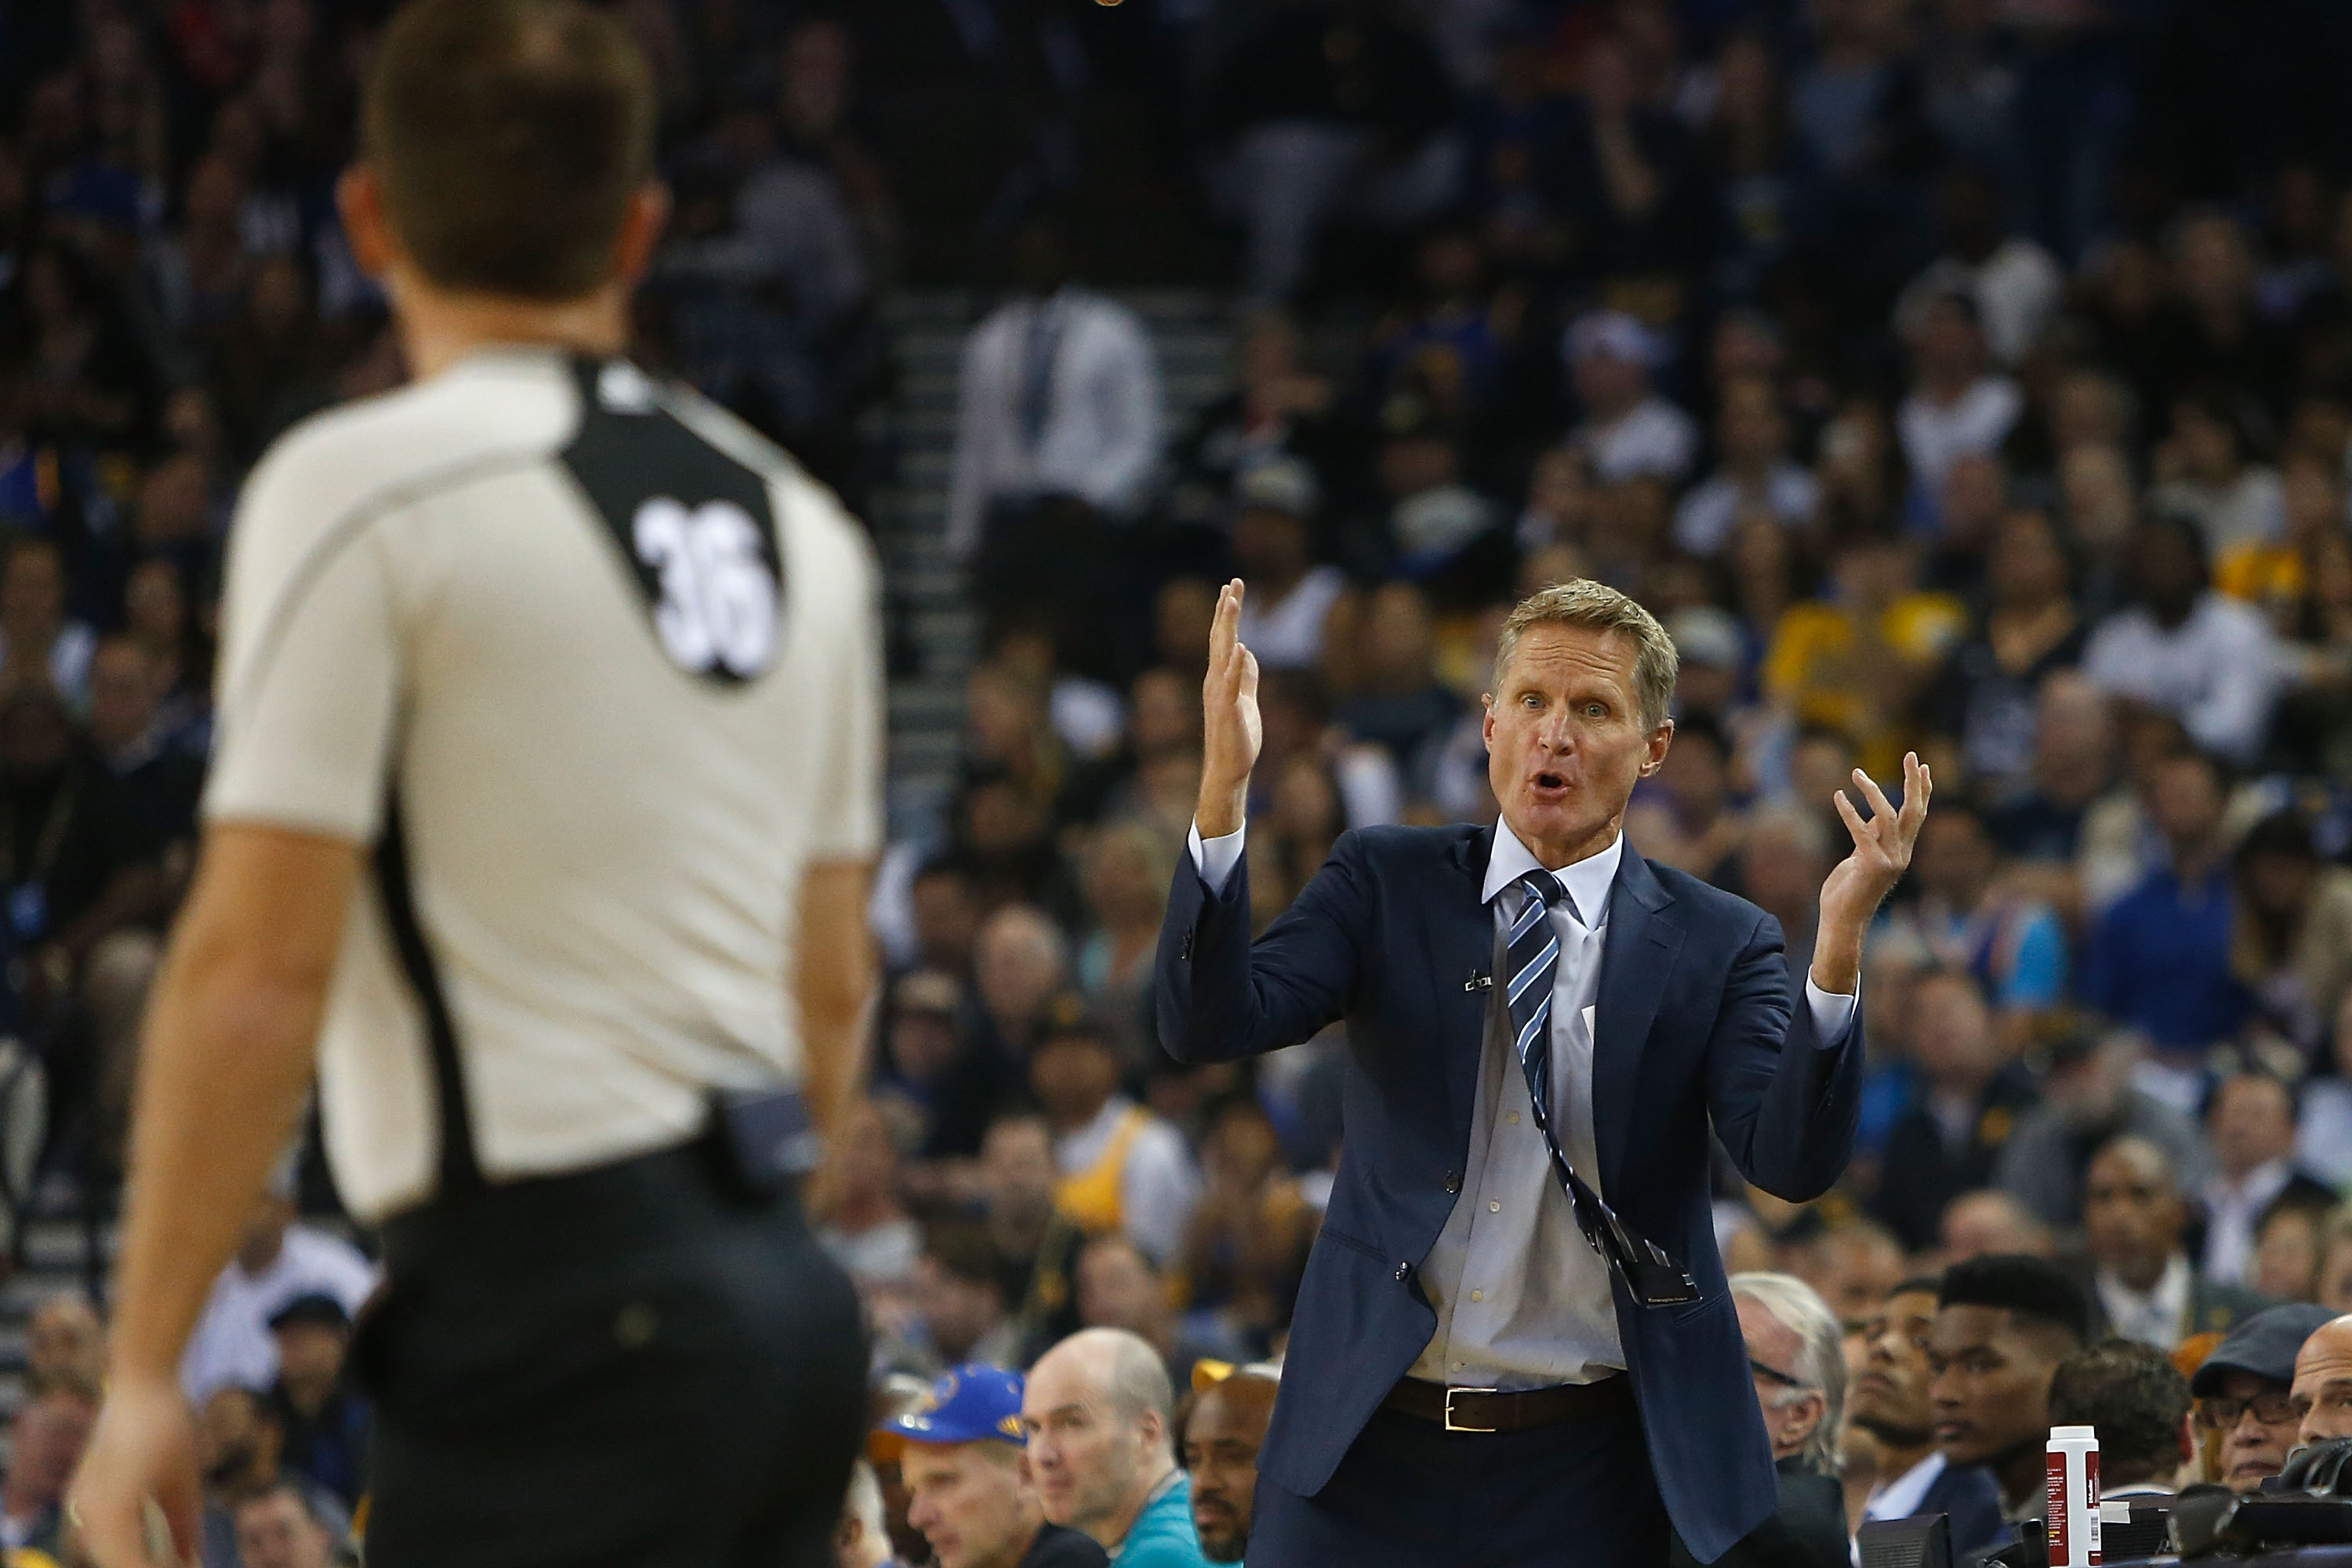 OAKLAND, CA - NOVEMBER 03: Head coach Steve Kerr of the Golden State Warriors talks to the referee during a game against the Oklahoma City Thunder at ORACLE Arena on November 3, 2016 in Oakland, California. NOTE TO USER: User expressly acknowledges and agrees that, by downloading and or using this photograph, user is consenting to the terms and conditions of Getty Images License Agreement.   Lachlan Cunningham/Getty Images/AFP